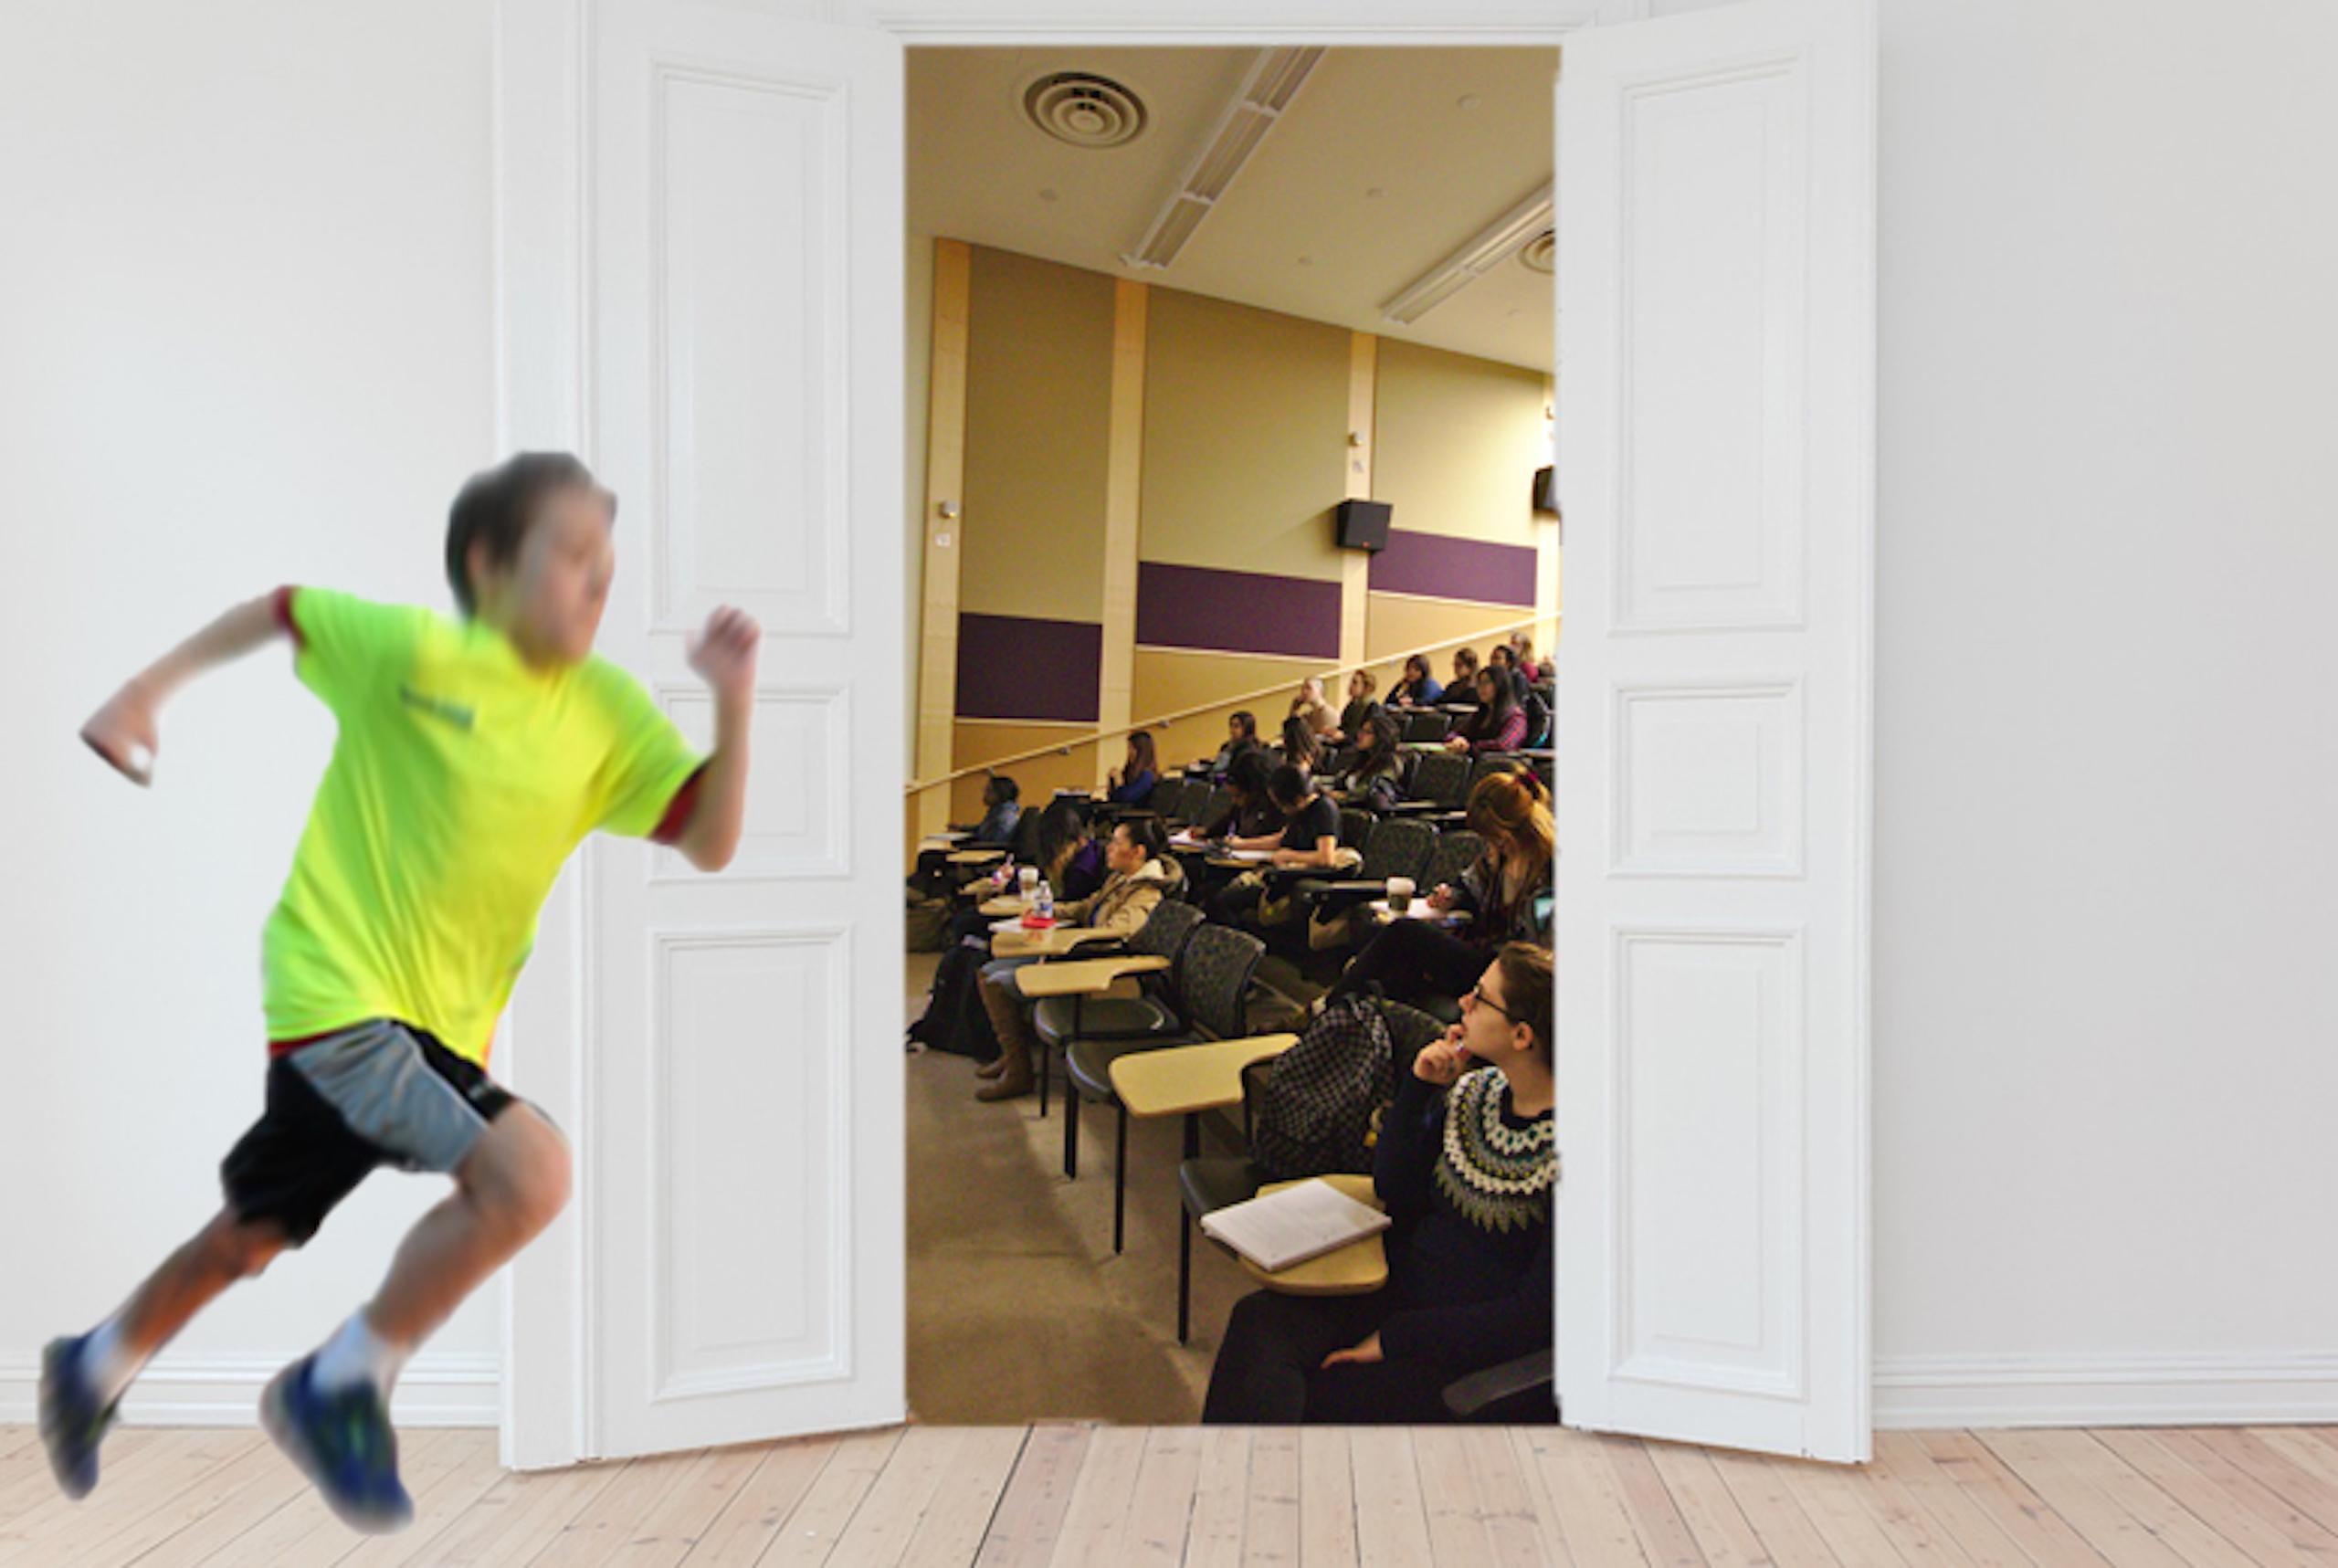 A blurred figure running to get into a classroom full of students.